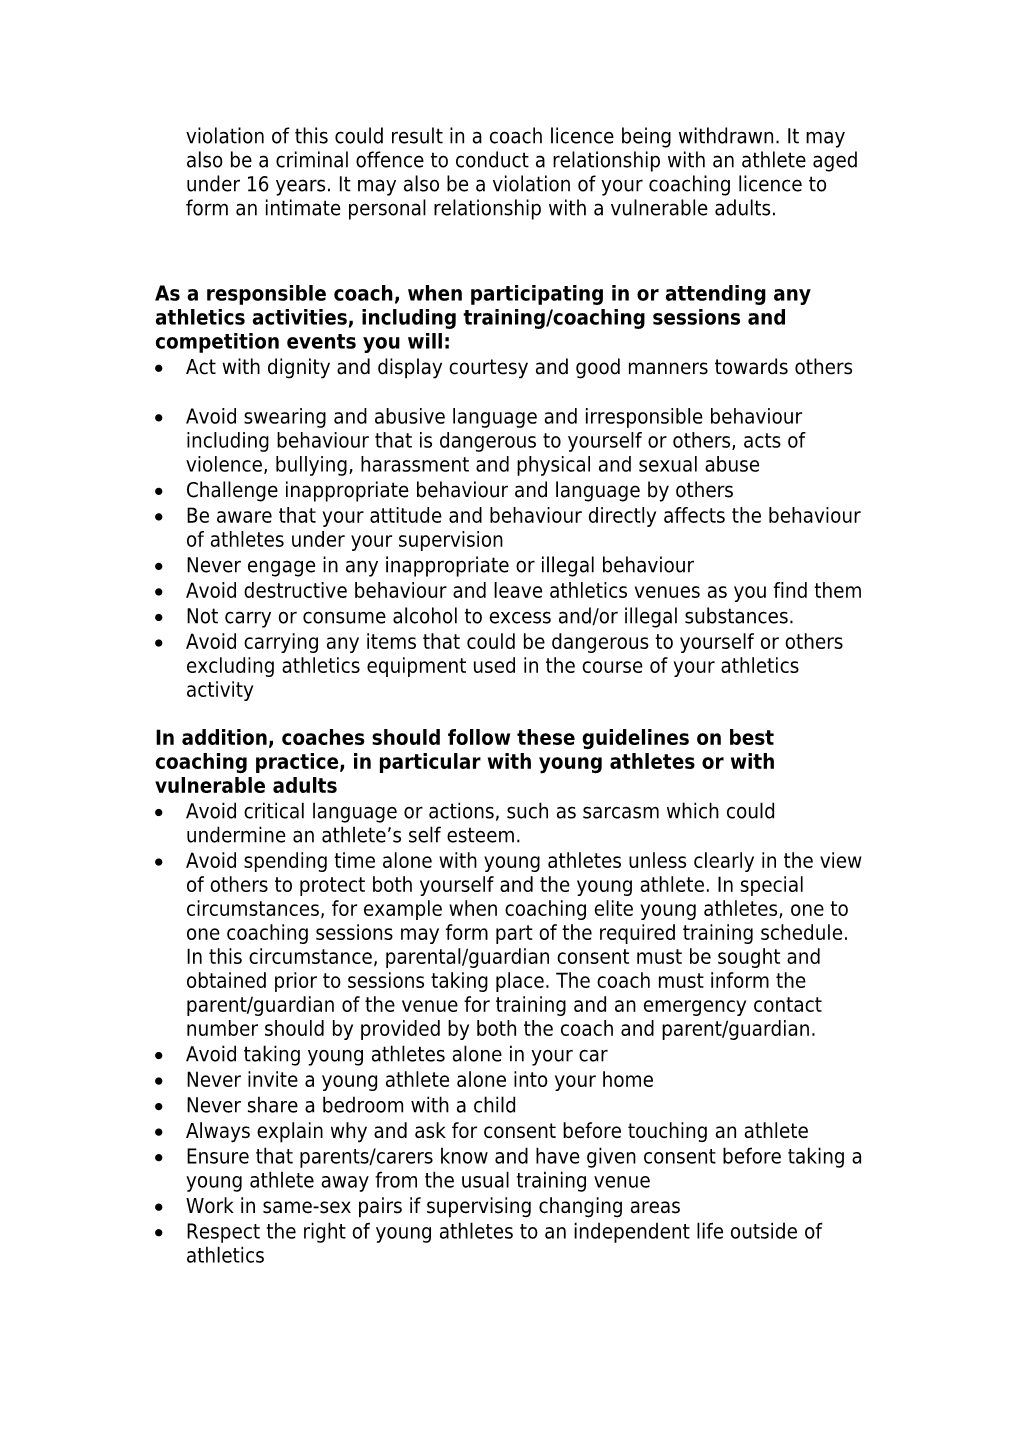 Code of Conduct for Coaches